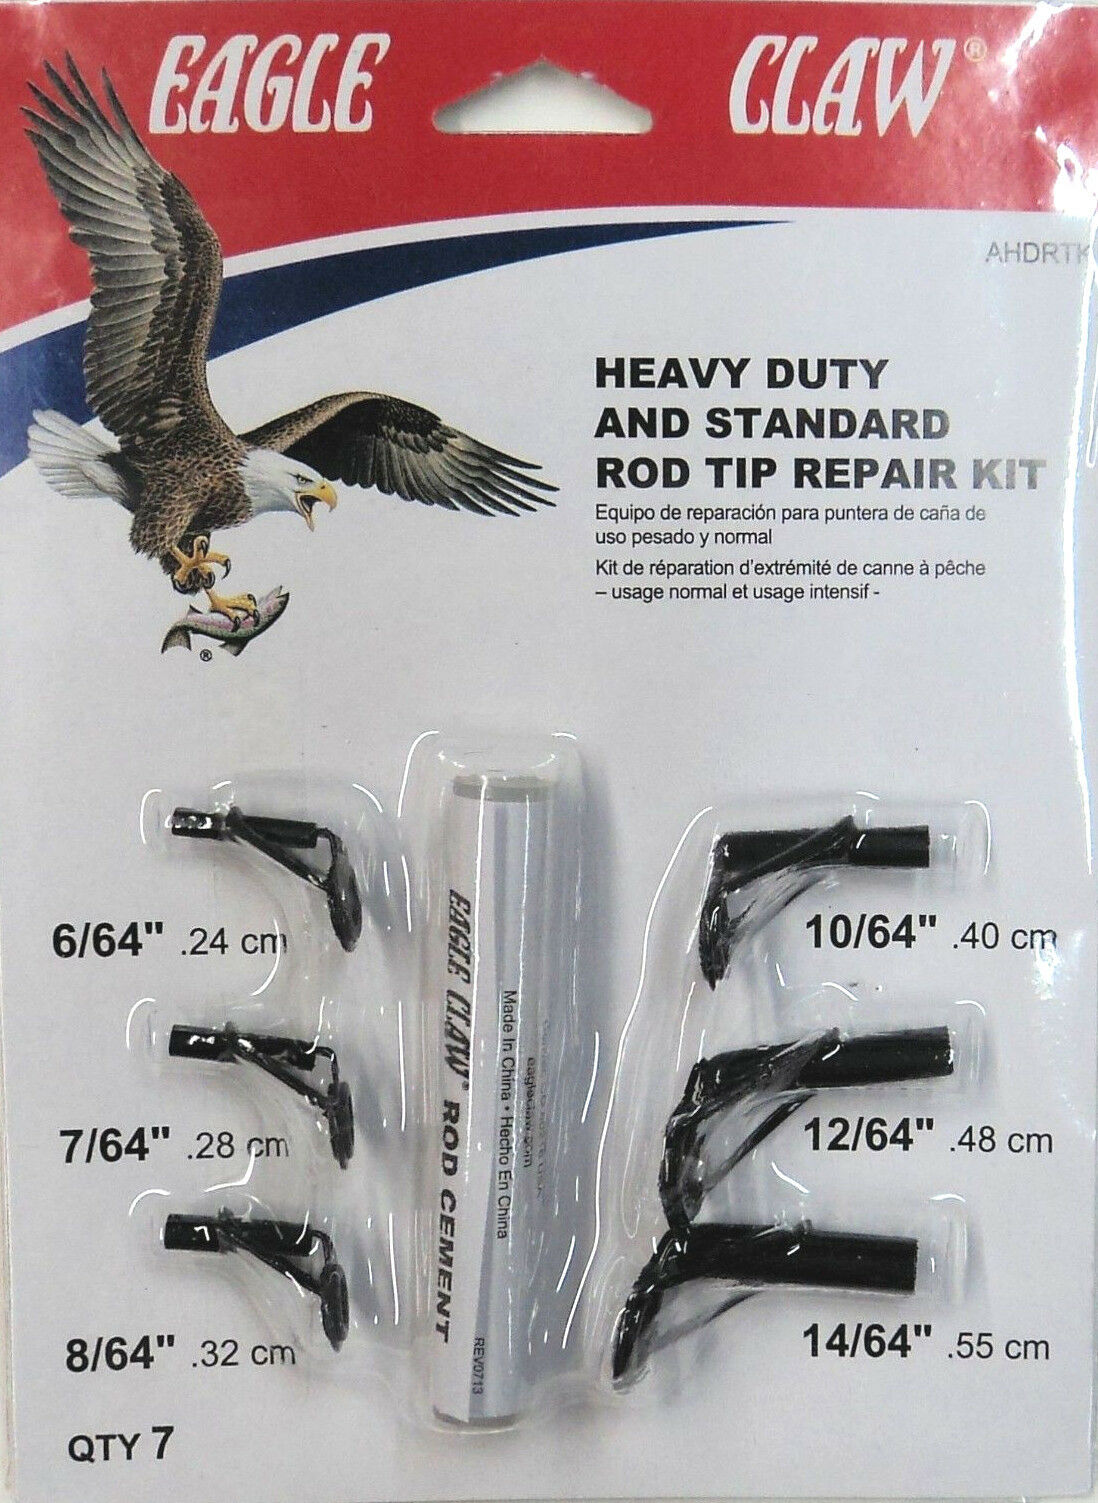 Eagle Claw Heavy Duty and Standard Rod Tip and Repair